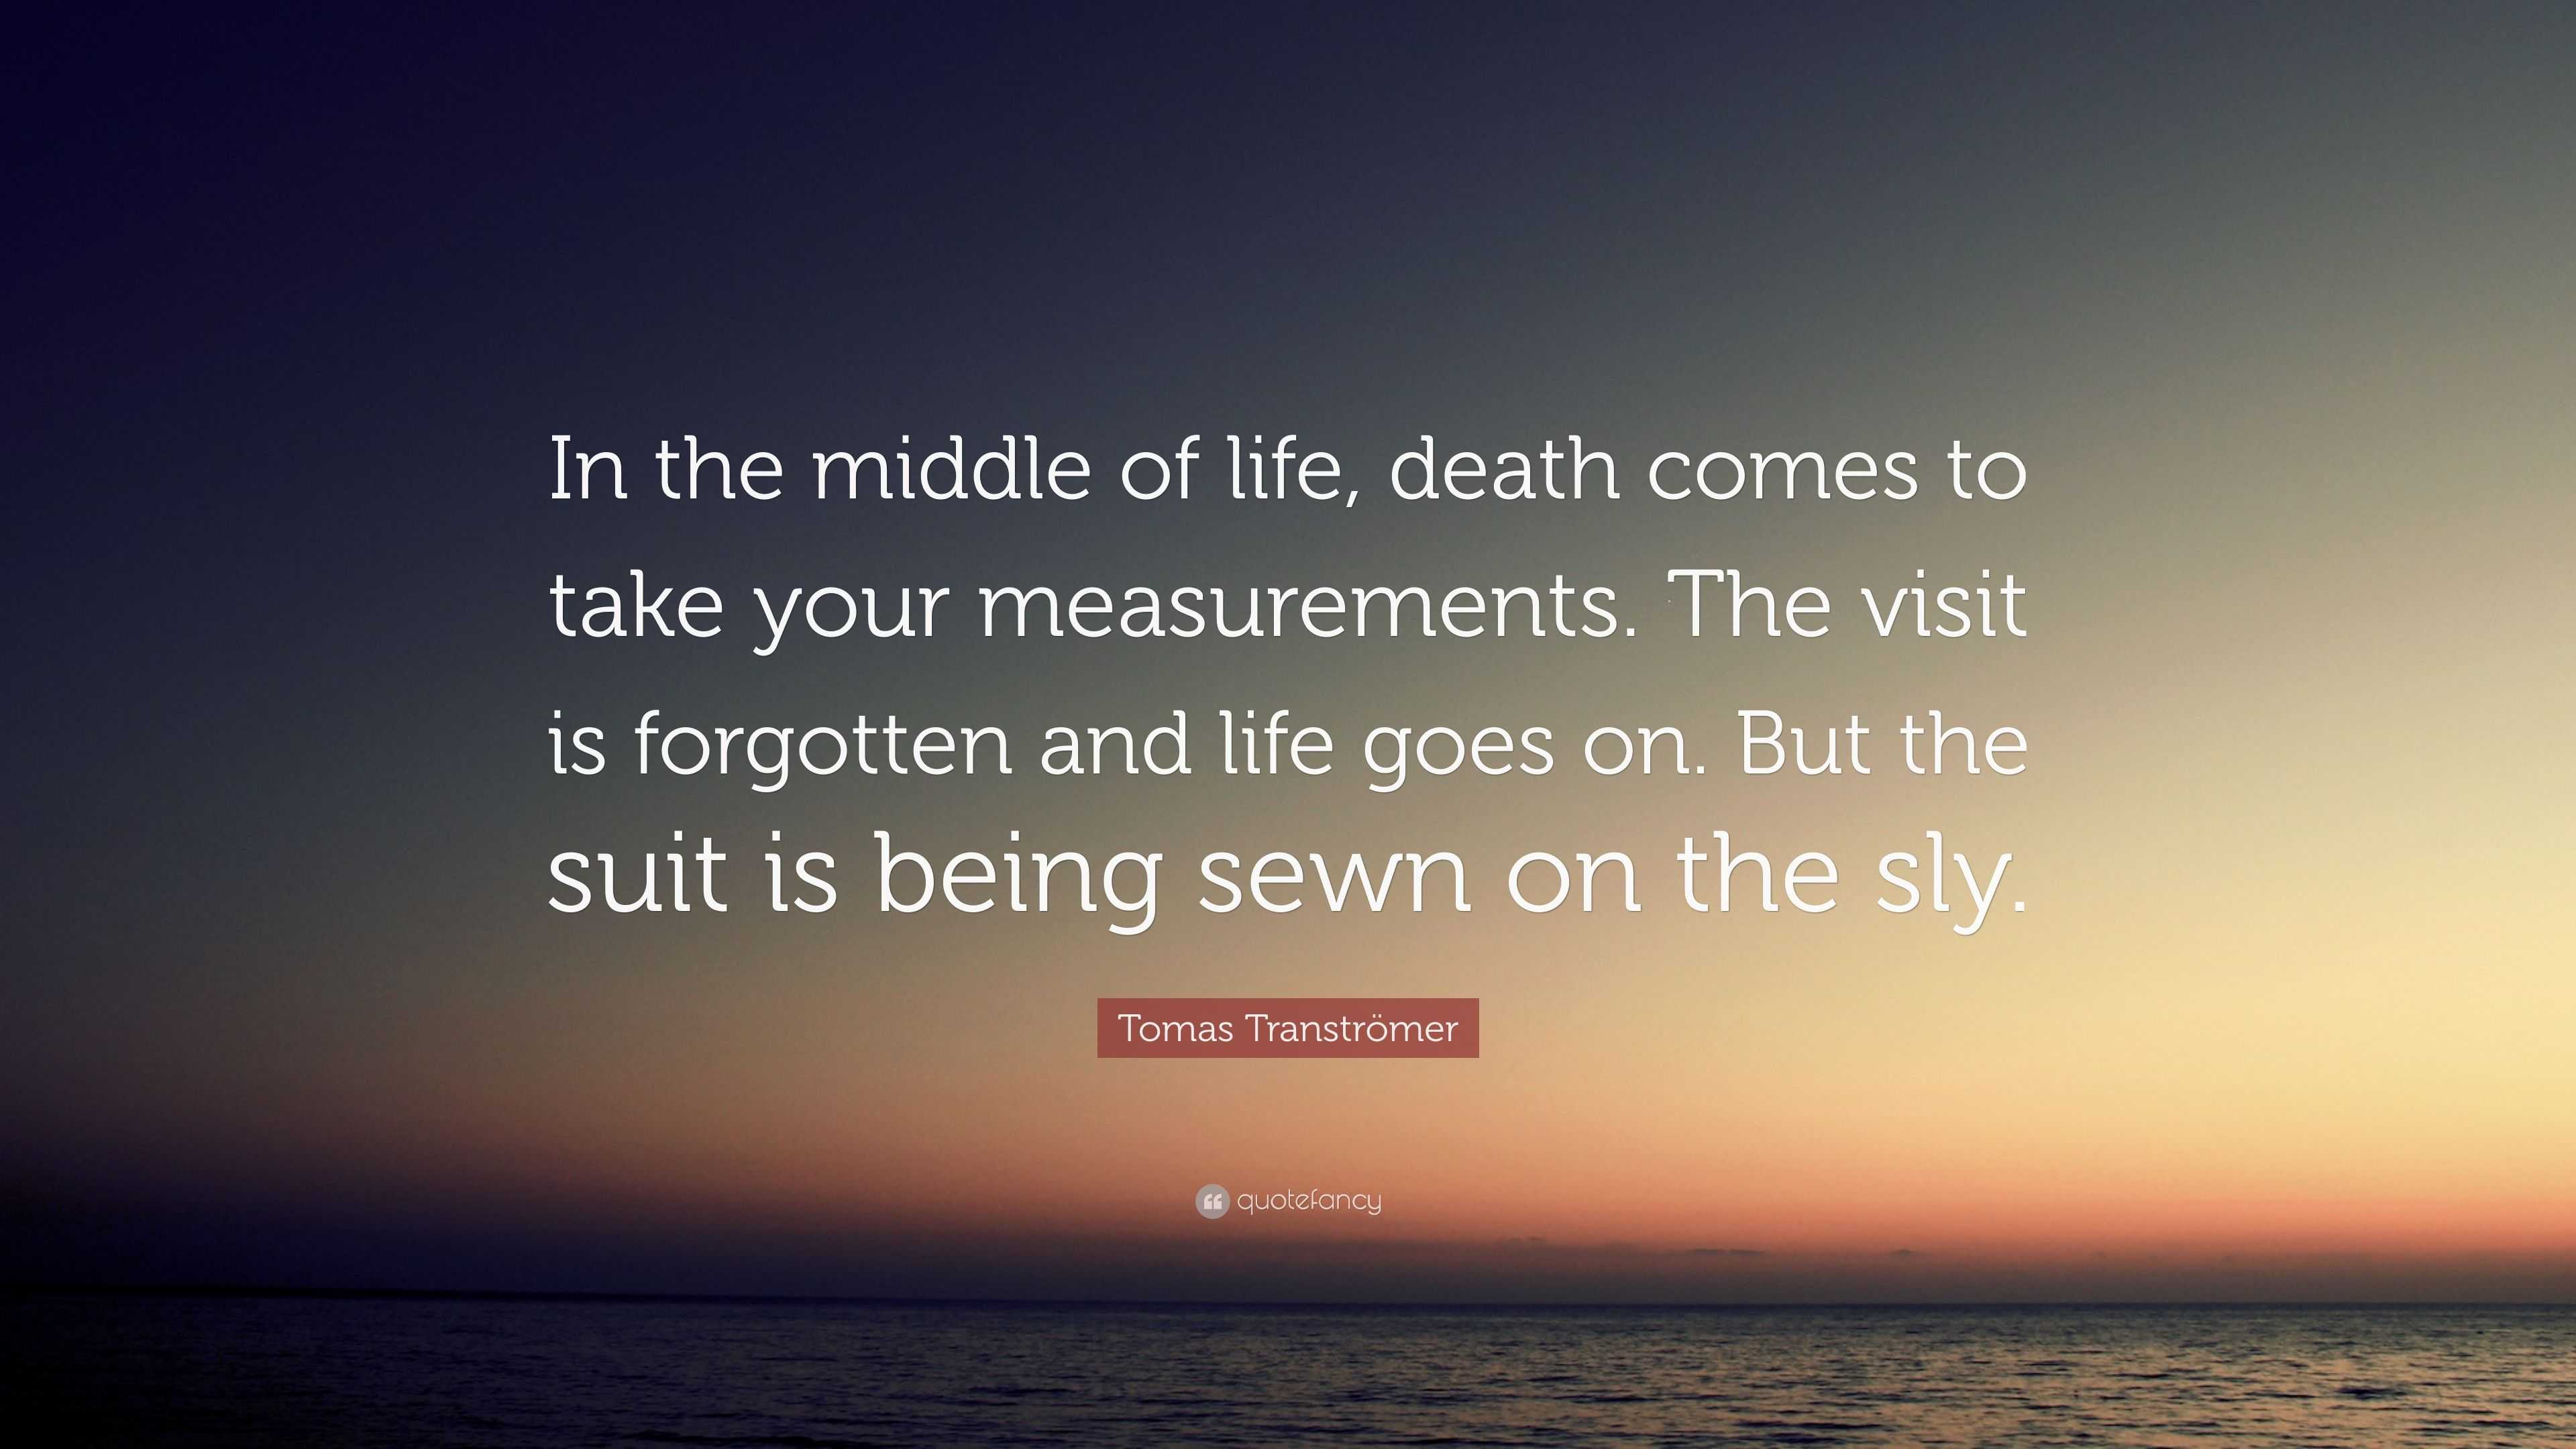 Tomas Transtromer Quote In The Middle Of Life Death Comes To Take Your Measurements The Visit Is Forgotten And Life Goes On But The Suit Is B 7 Wallpapers Quotefancy